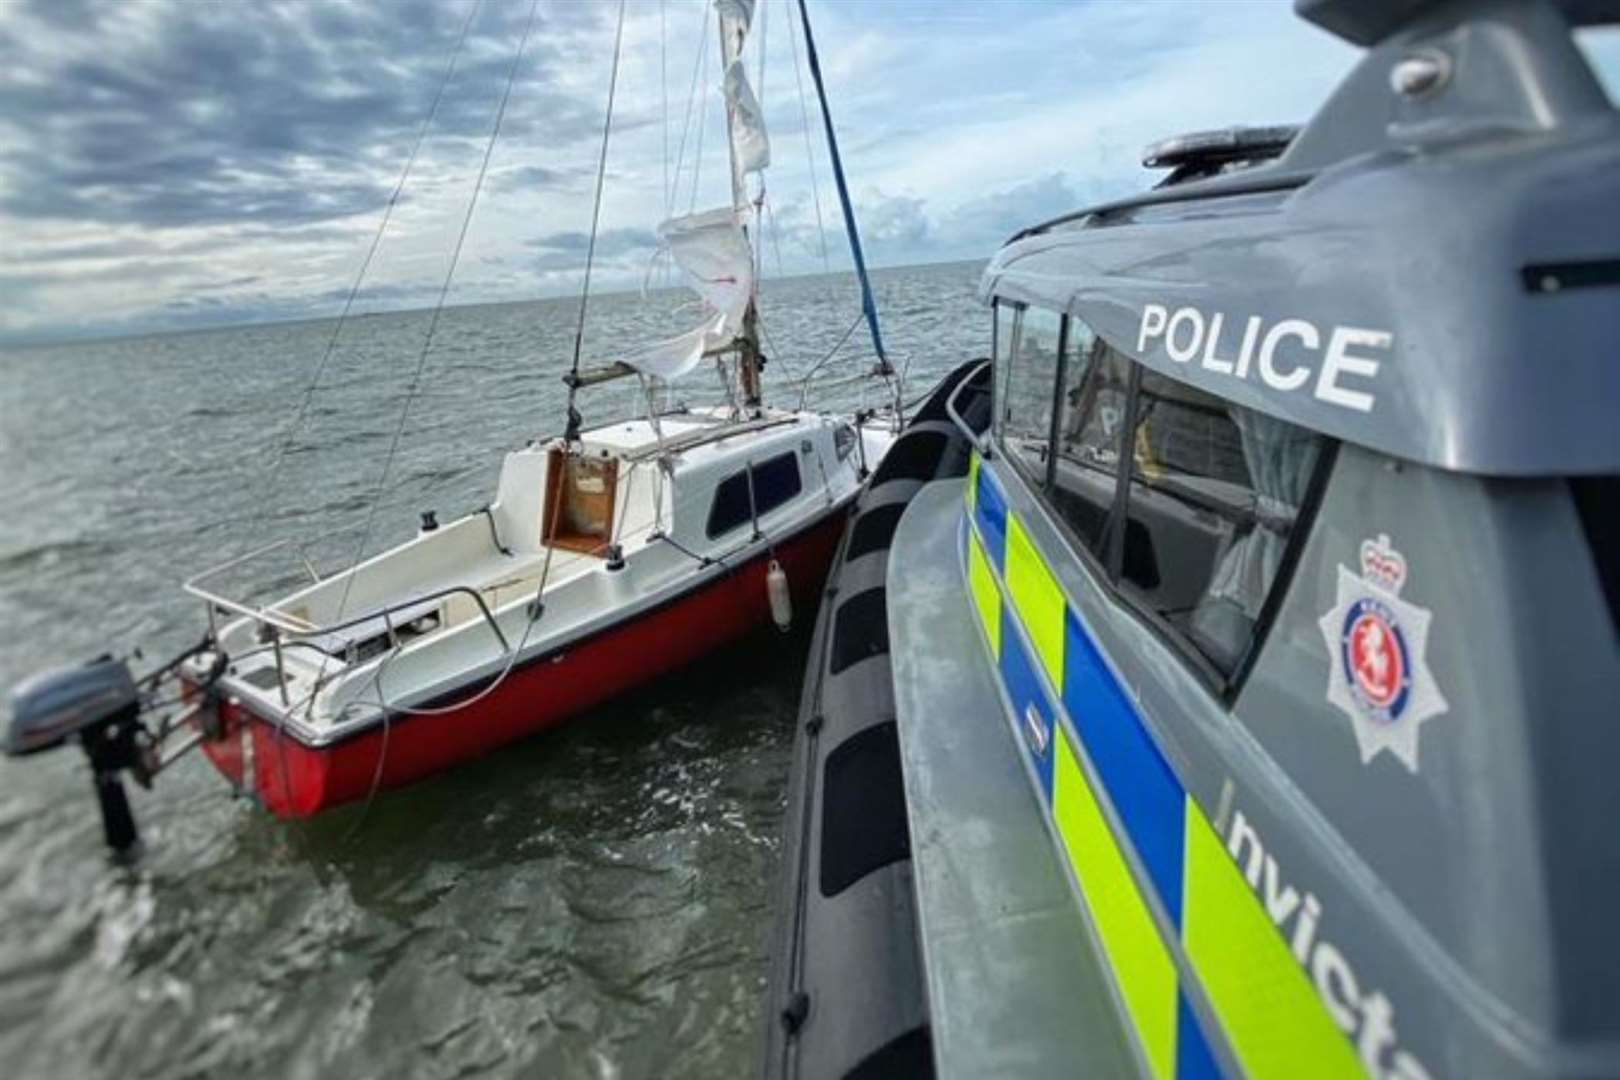 A stolen yacht has been recovered in the sea off the coast of Margate. Photo: Kent Police